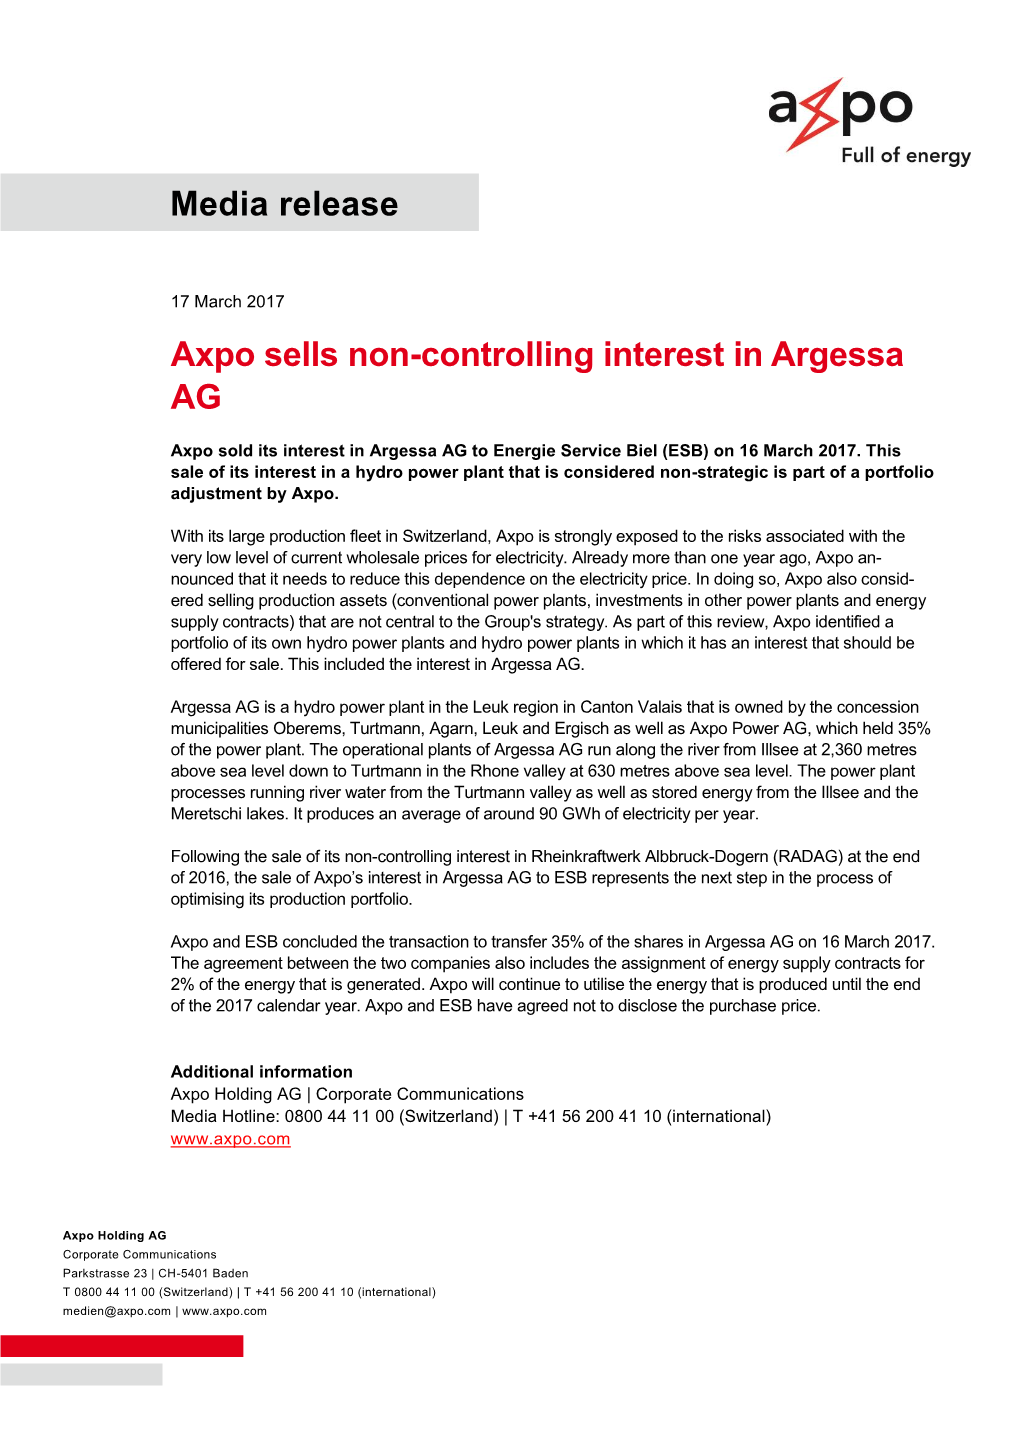 Media Release Axpo Sells Non-Controlling Interest in Argessa AG